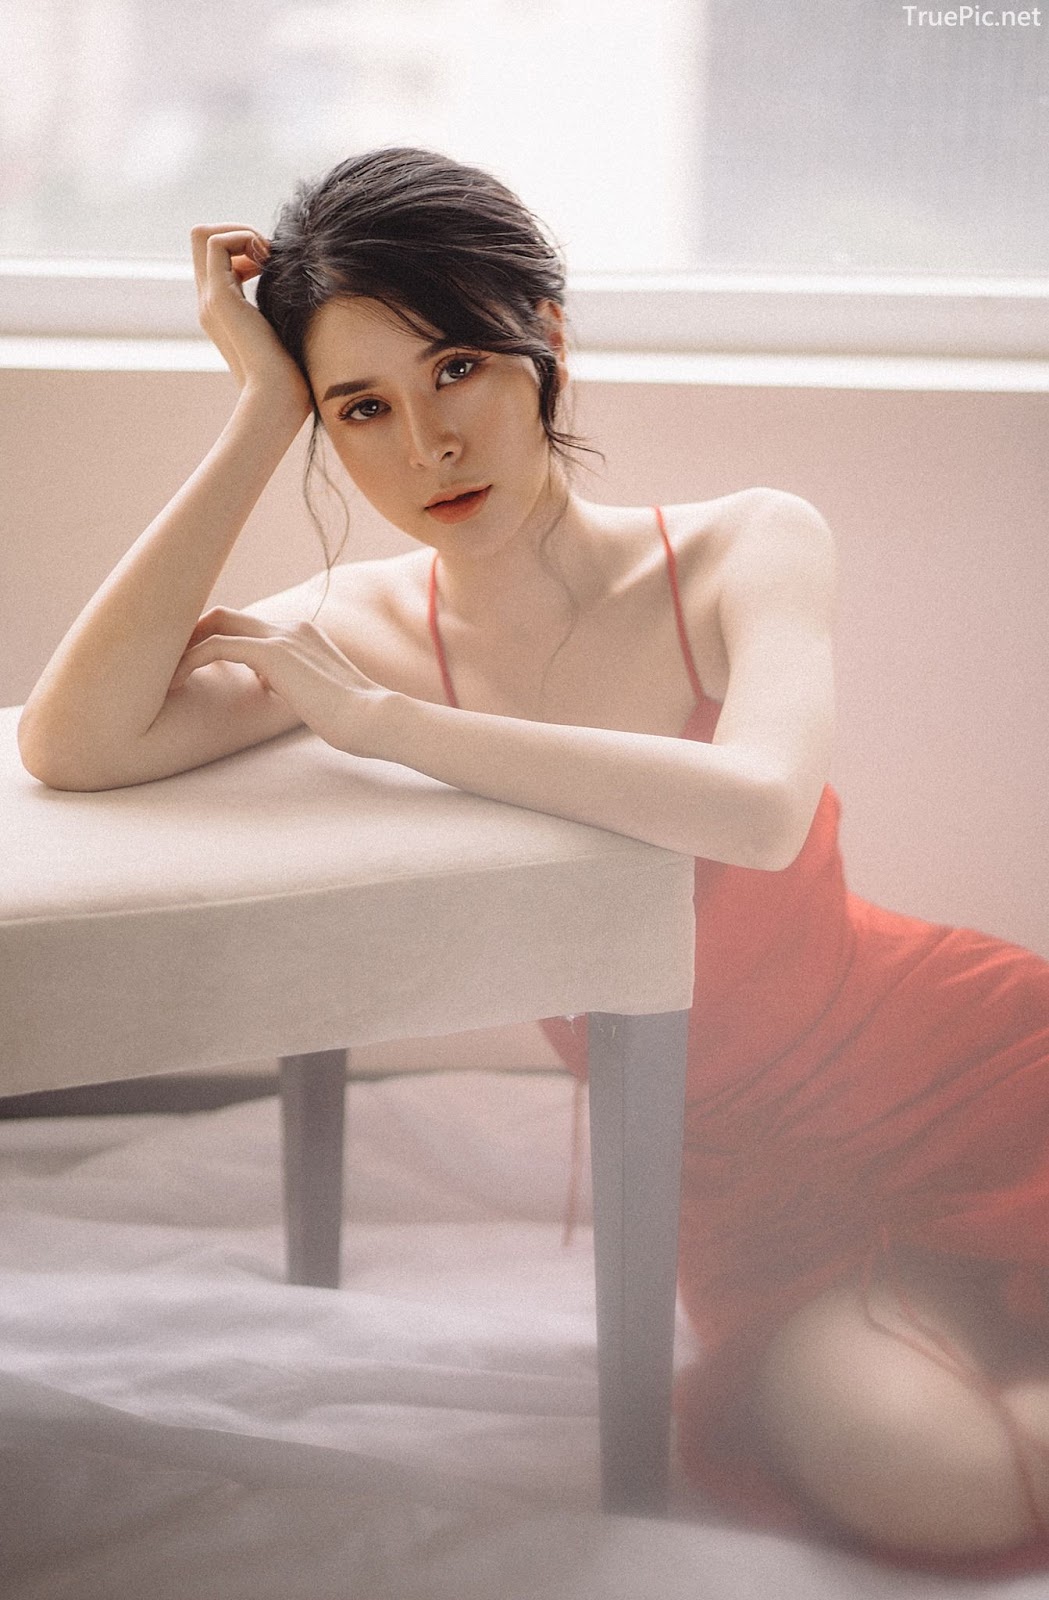 Vietnamese hot model - The beauty of Women with Red Camisole Dress - Photo by Linh Phan - Picture 15